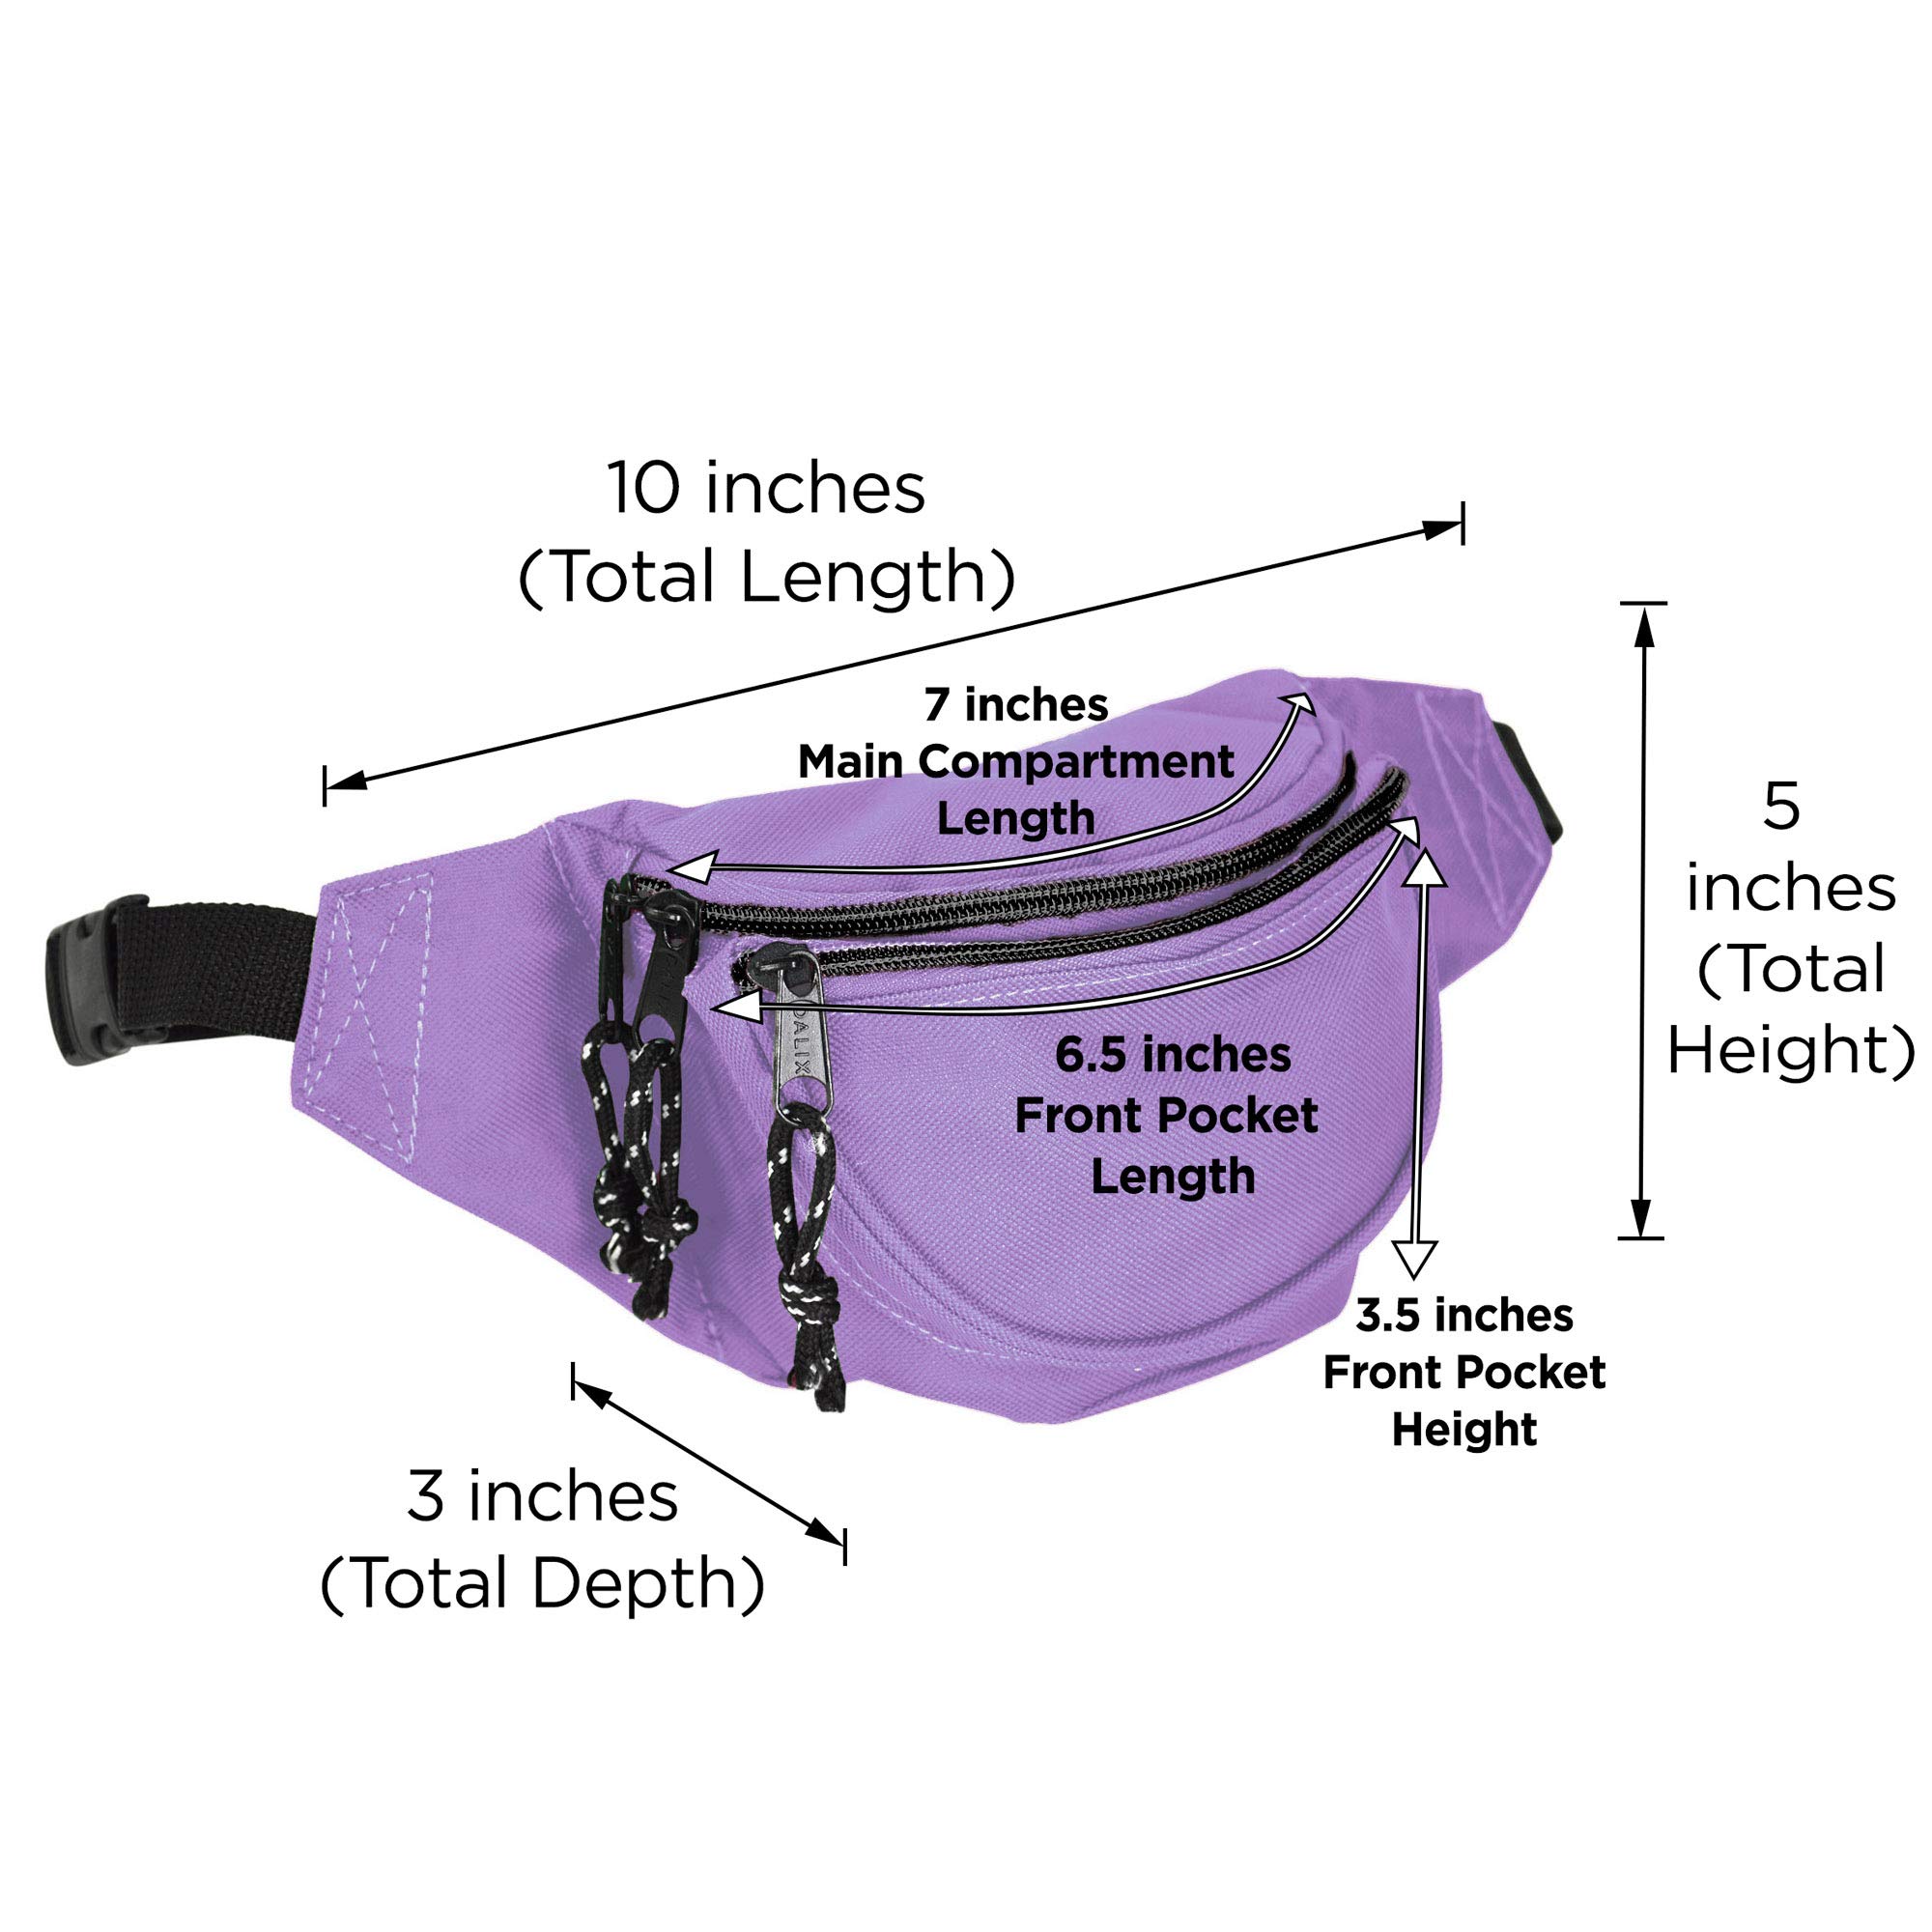 DALIX Fanny Pack w/ 3 Pockets Traveling Concealment Pouch Airport Money Bag